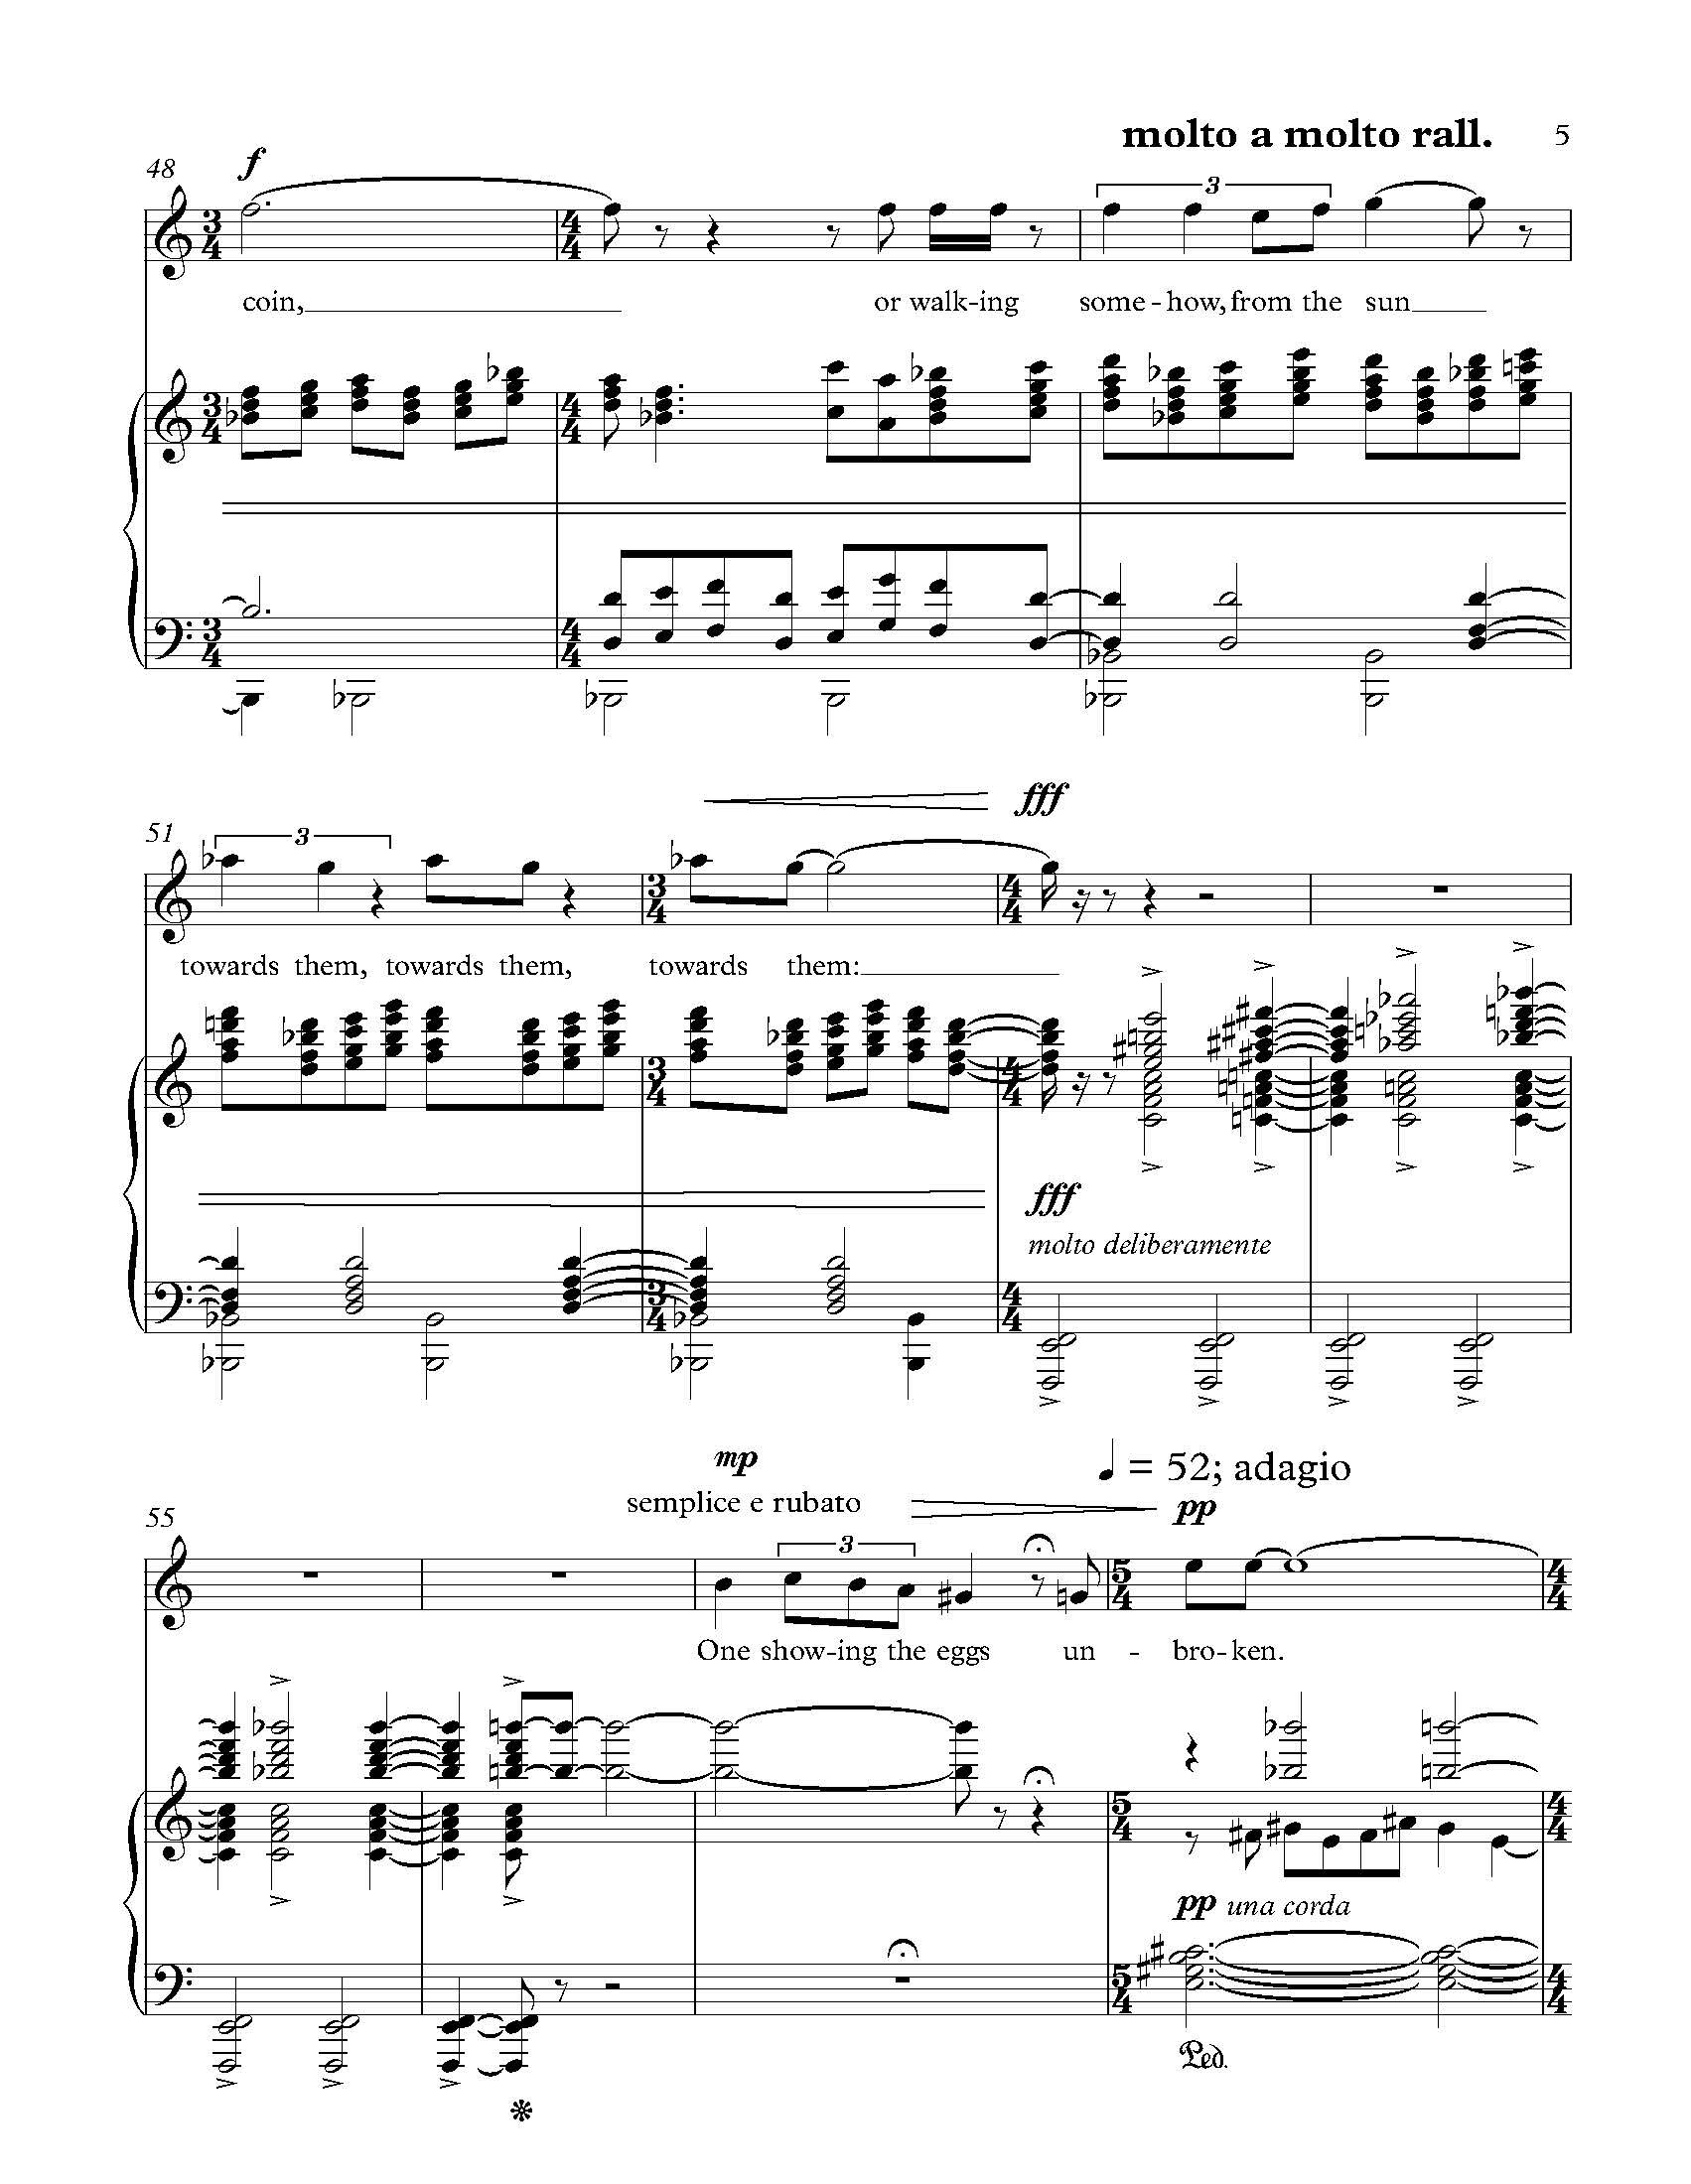 The Explosion - Complete Score_Page_11.jpg